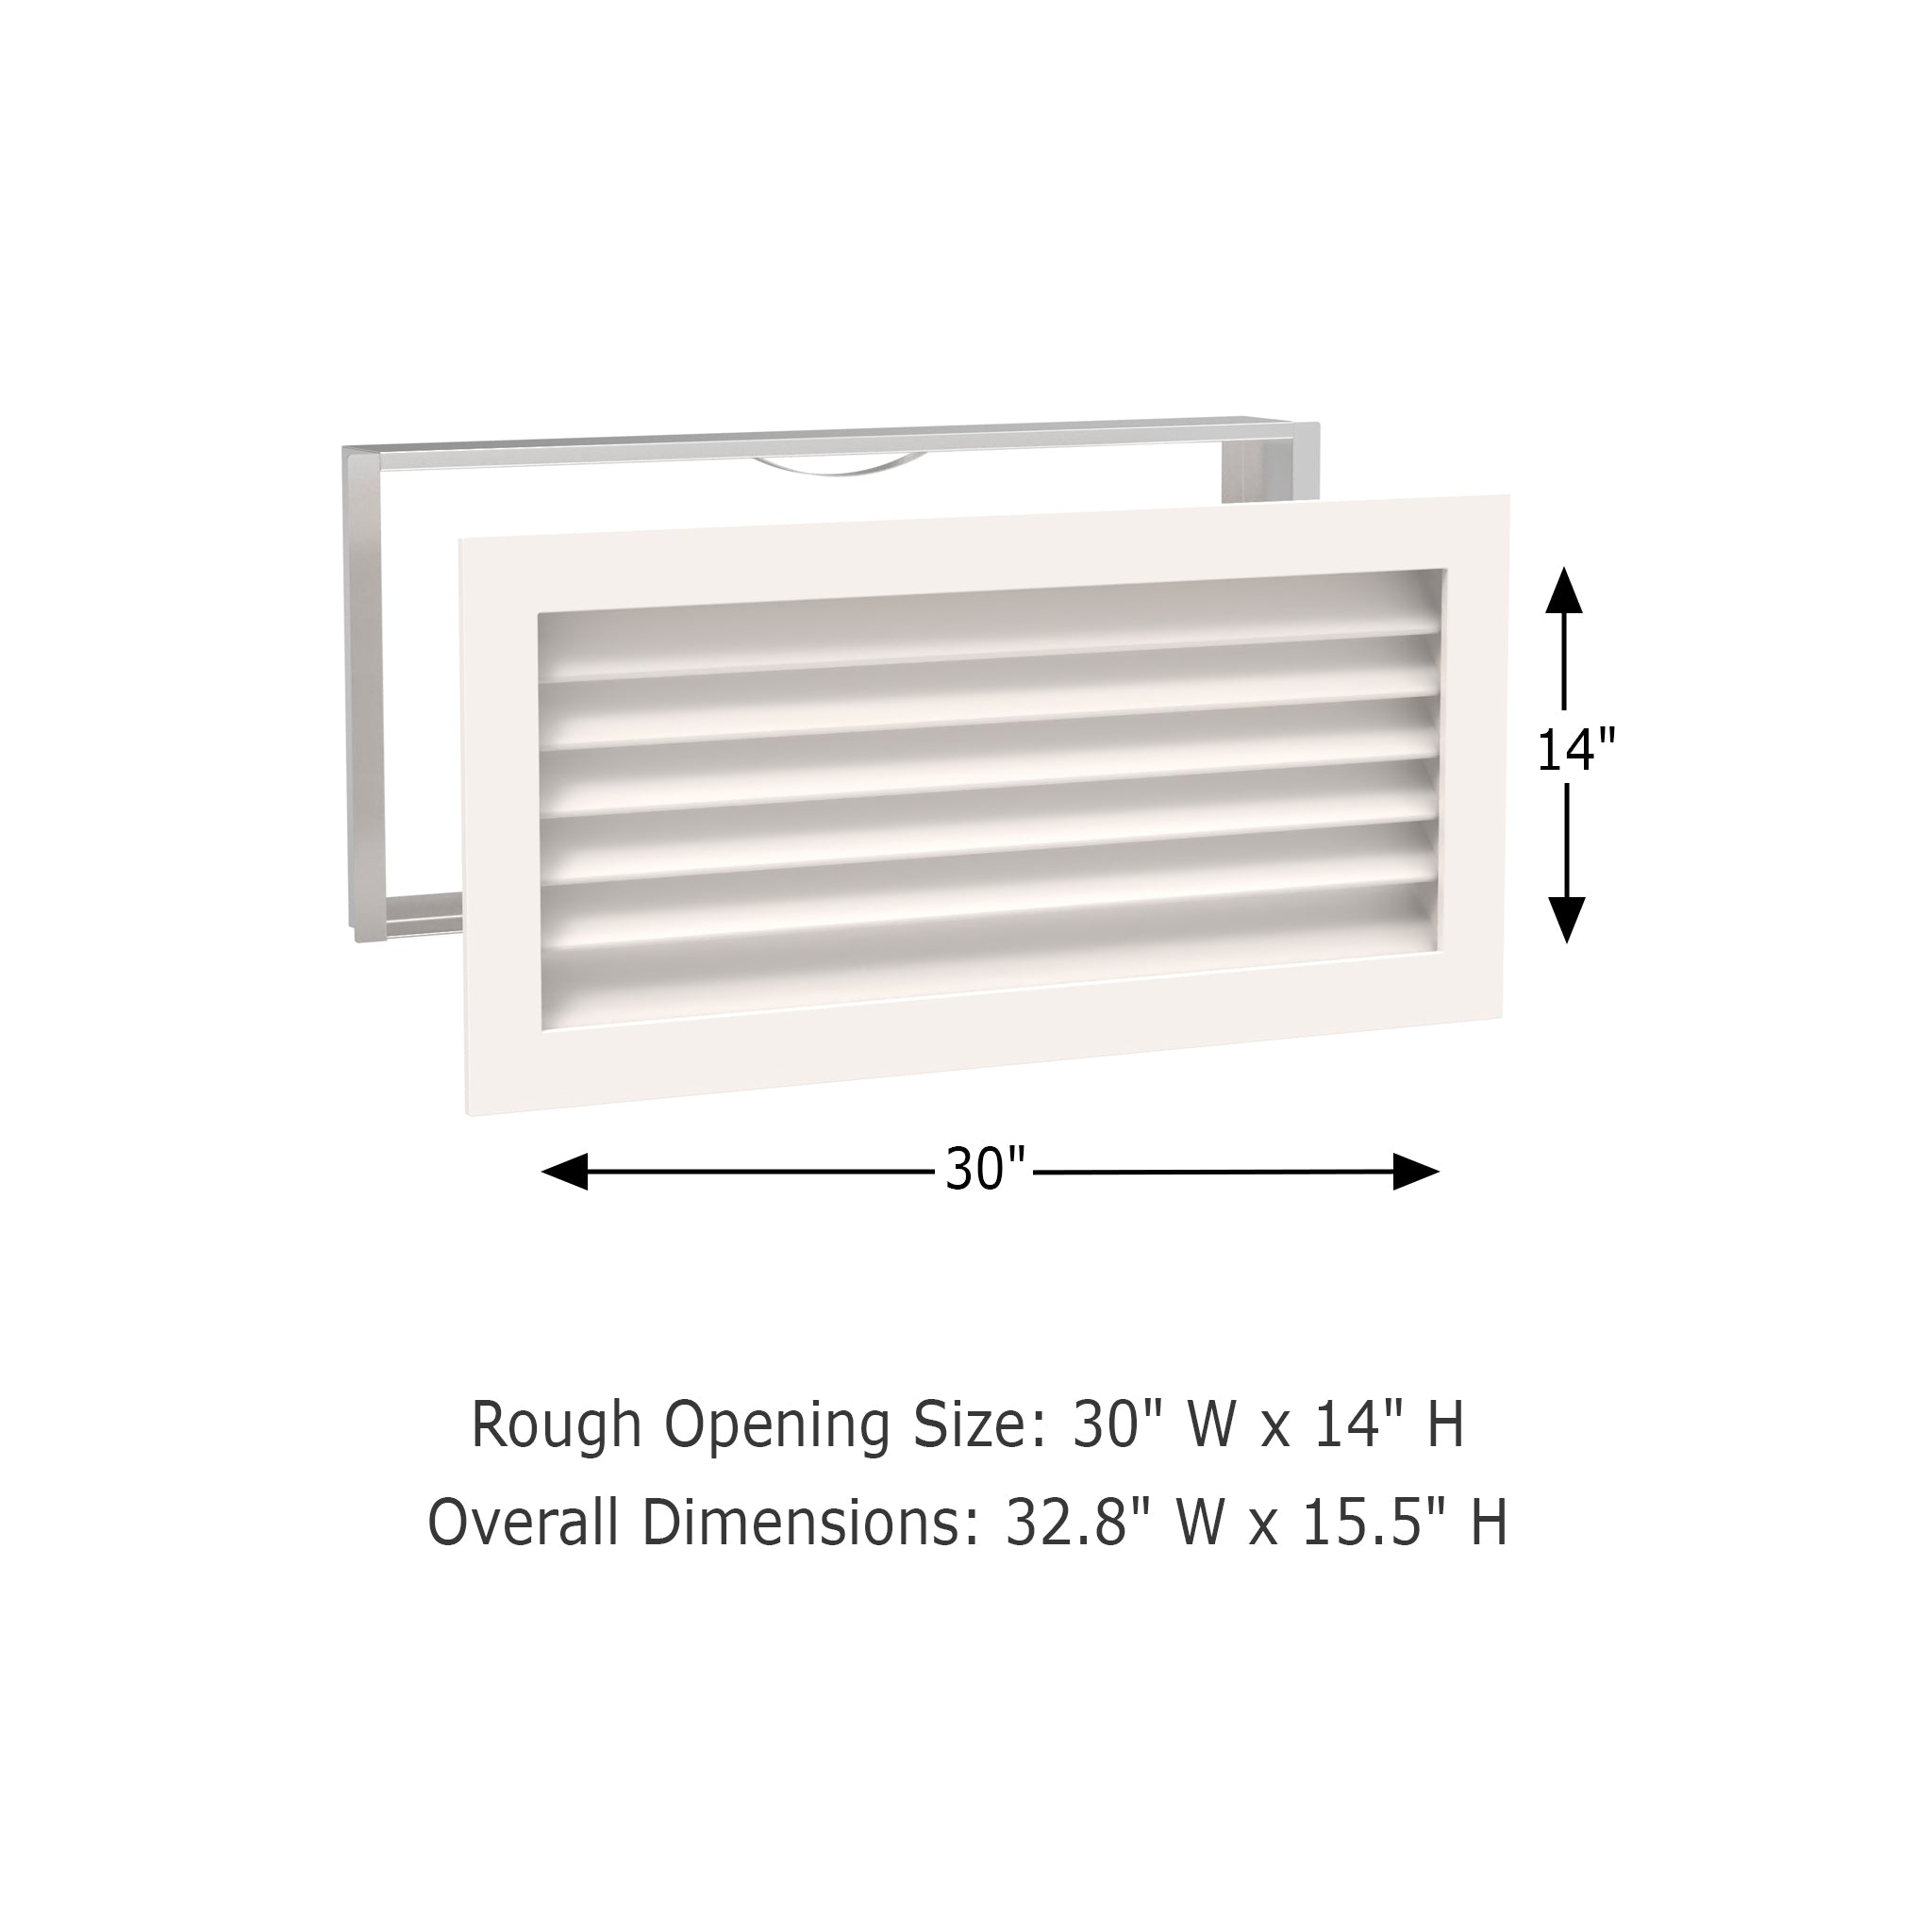 Worth Home Products - decorative wood AC vent covers luxury return vent - Primed Wood Louvers 30x14